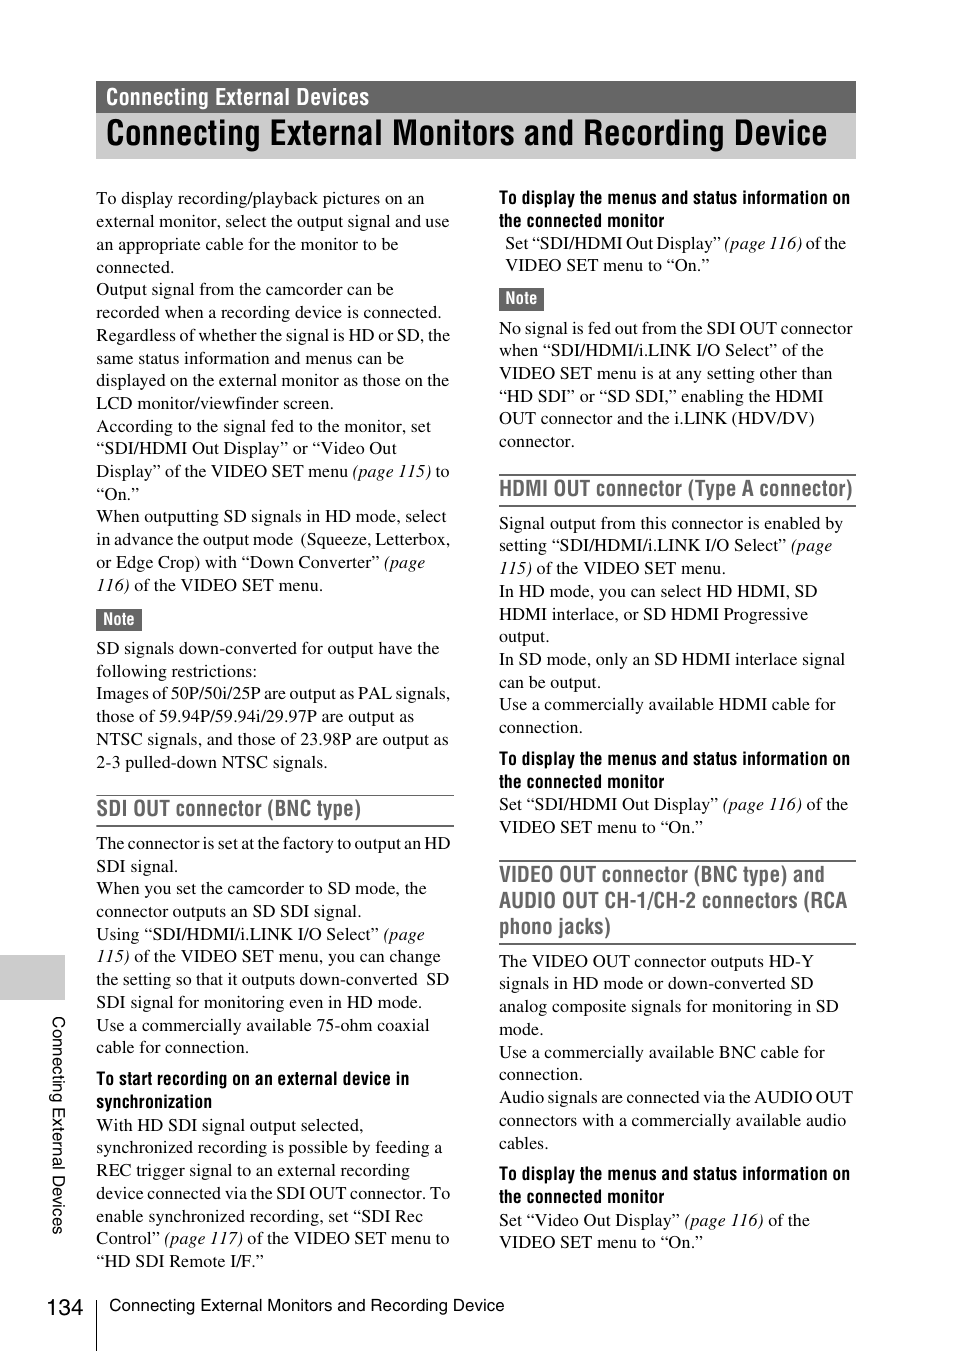 Connecting external devices, Connecting external monitors and recording device | Sony PMW-F3K User Manual | Page 134 / 164